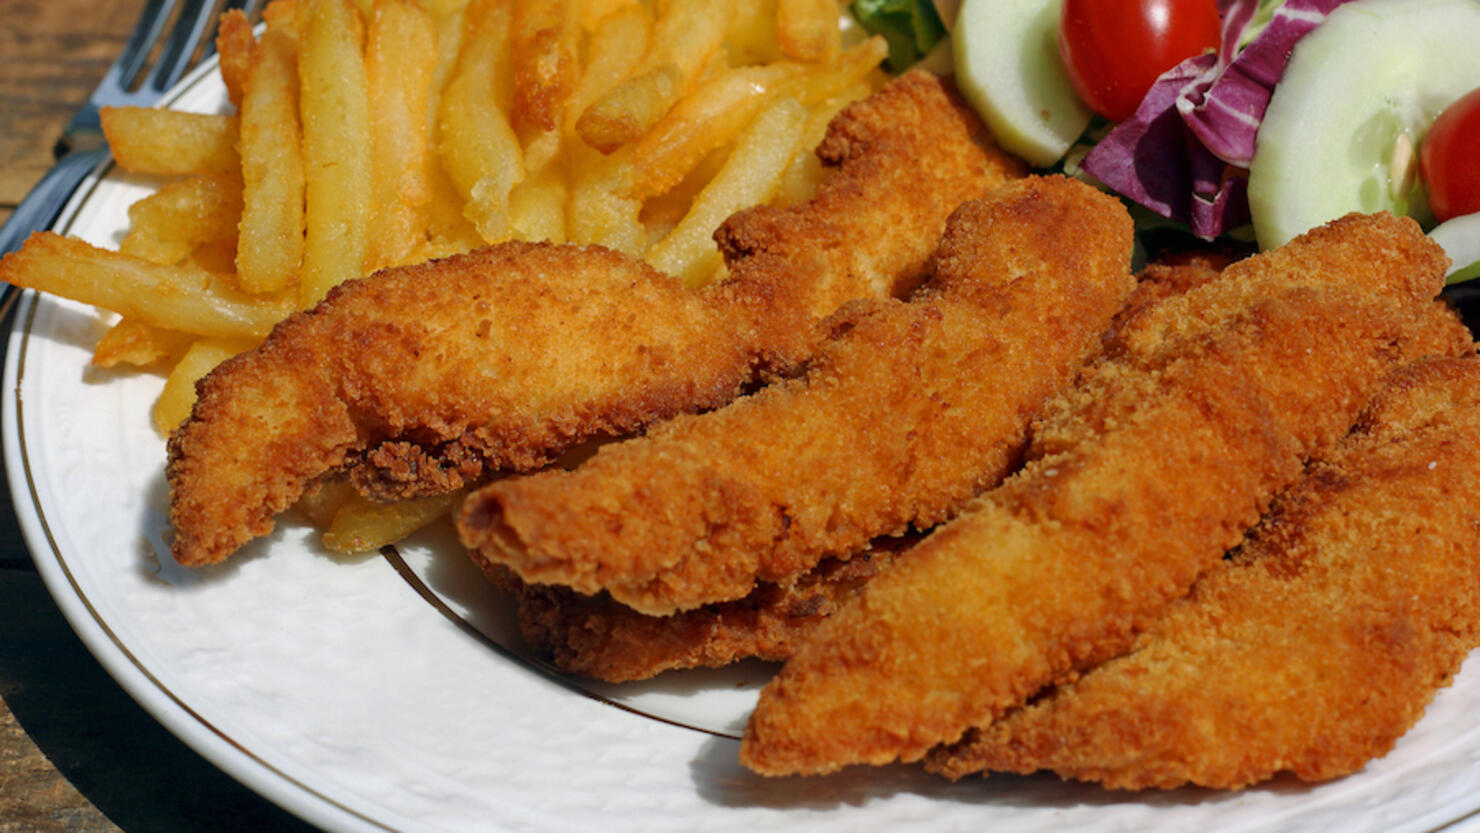 Chicken finger dinner with salad and french fried potato